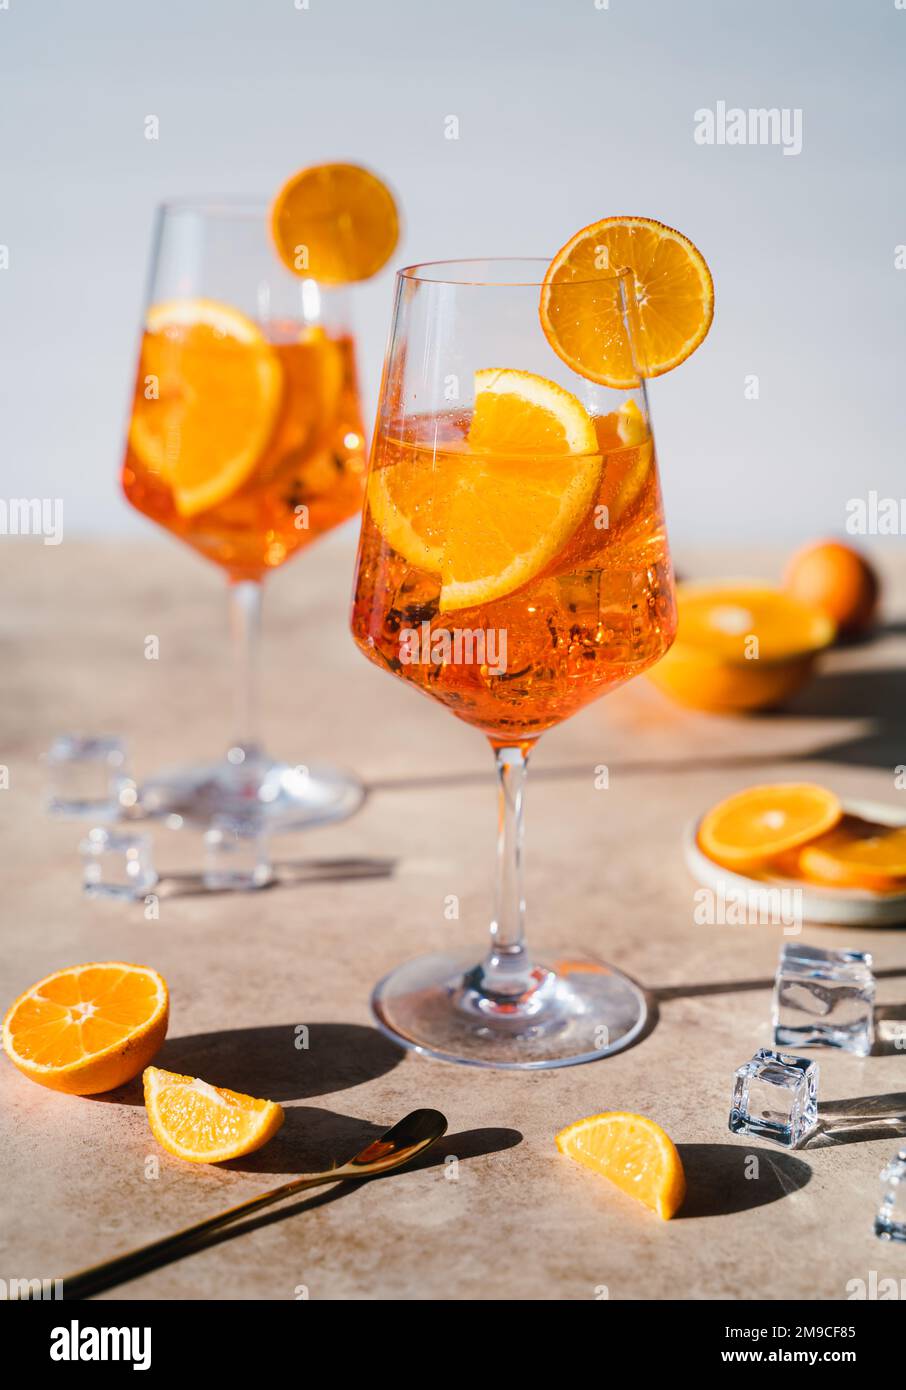 Close up of two aperol spritz drinks on sunny beige background. Stock Photo